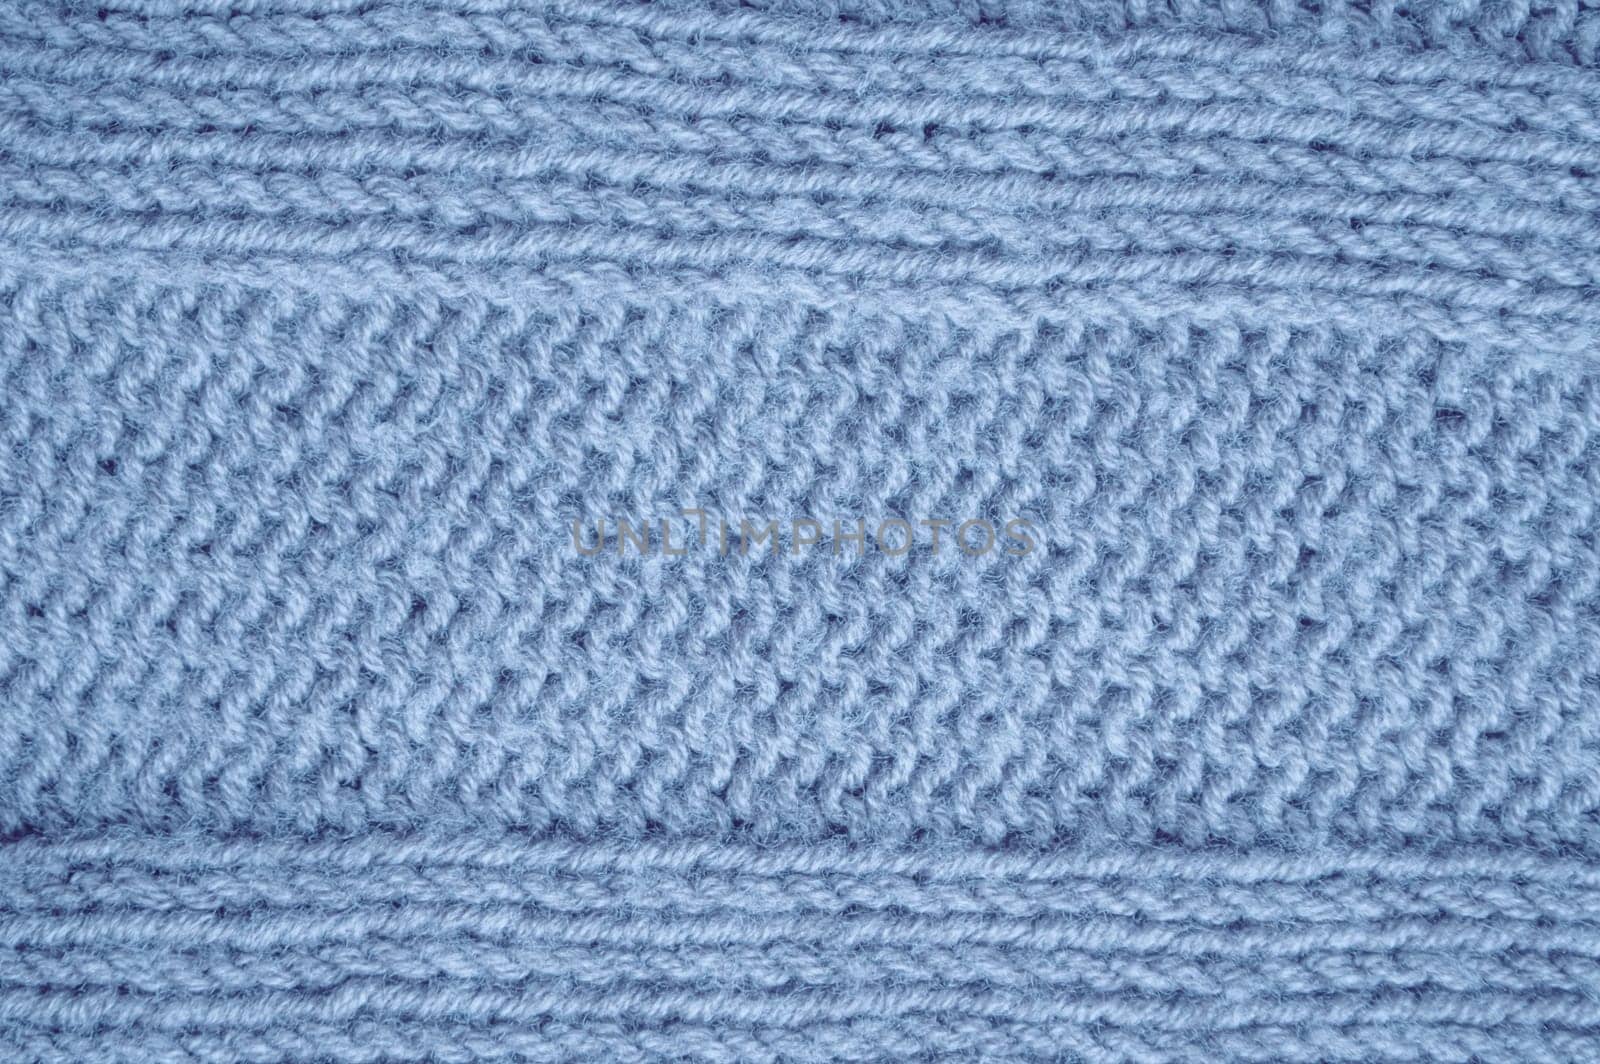 Organic knitting background with detail woven threads. by YASNARADA